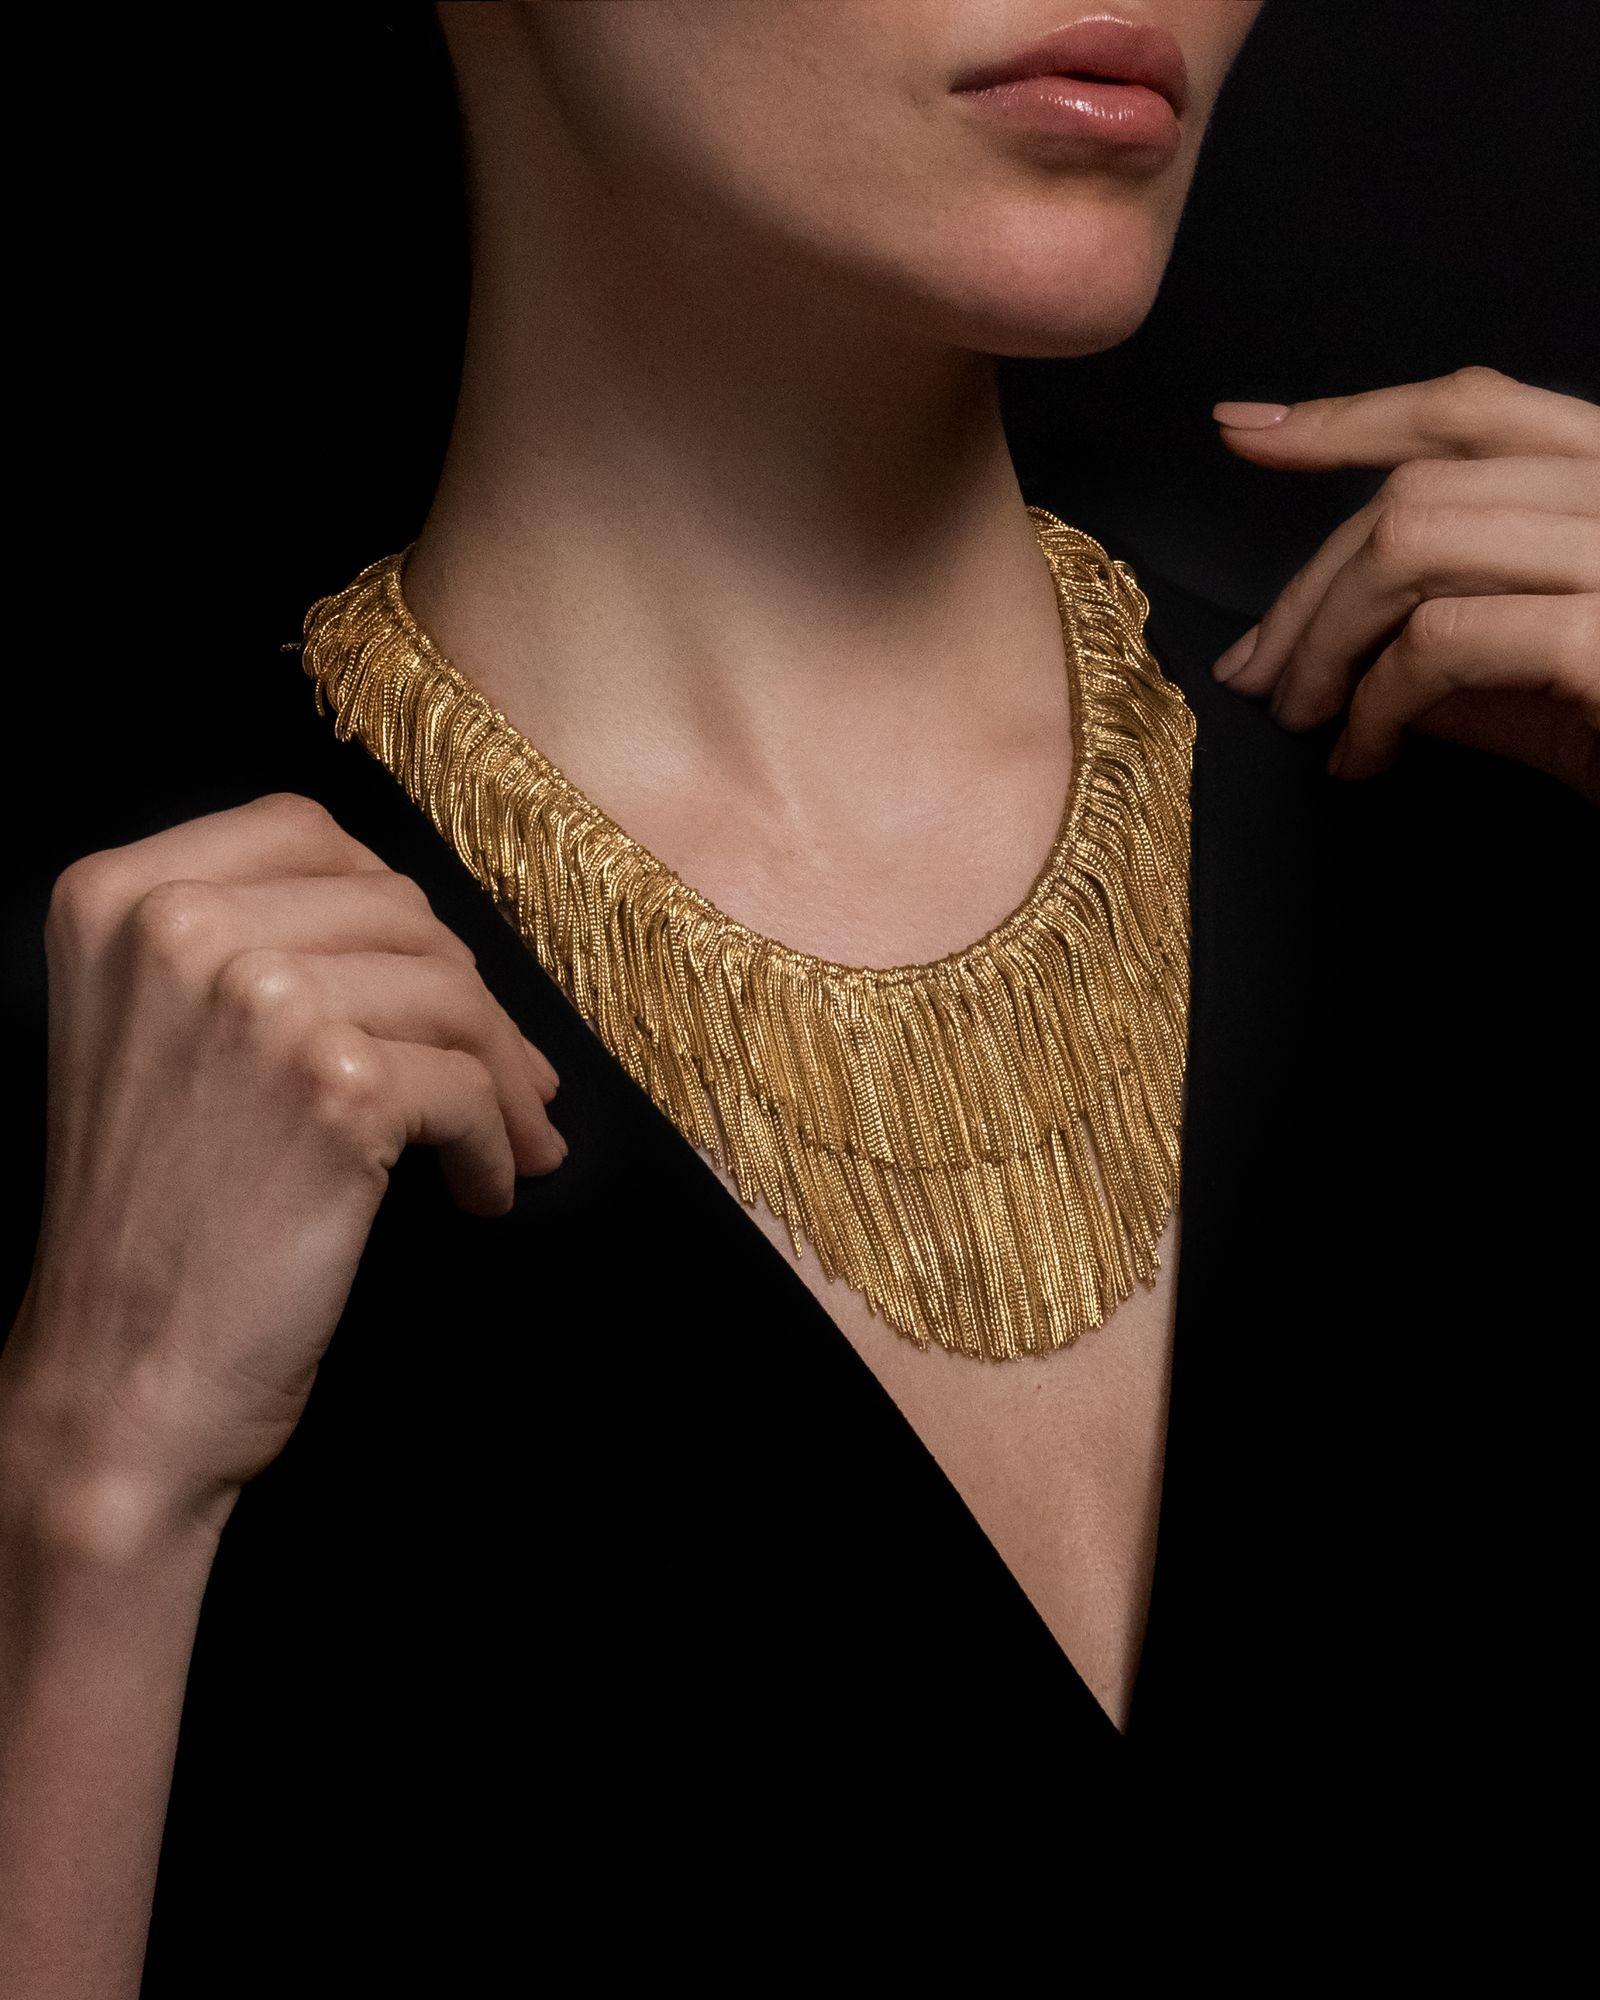 A stunning 18ct gold fringe necklace by Tiffany & Co. circa 1970s, formed of a double layer of fine fox-tail chain fringes, one shorter in front overlaying a longer one behind, graduating in length from 7cm at the front to 2.5cm behind with a